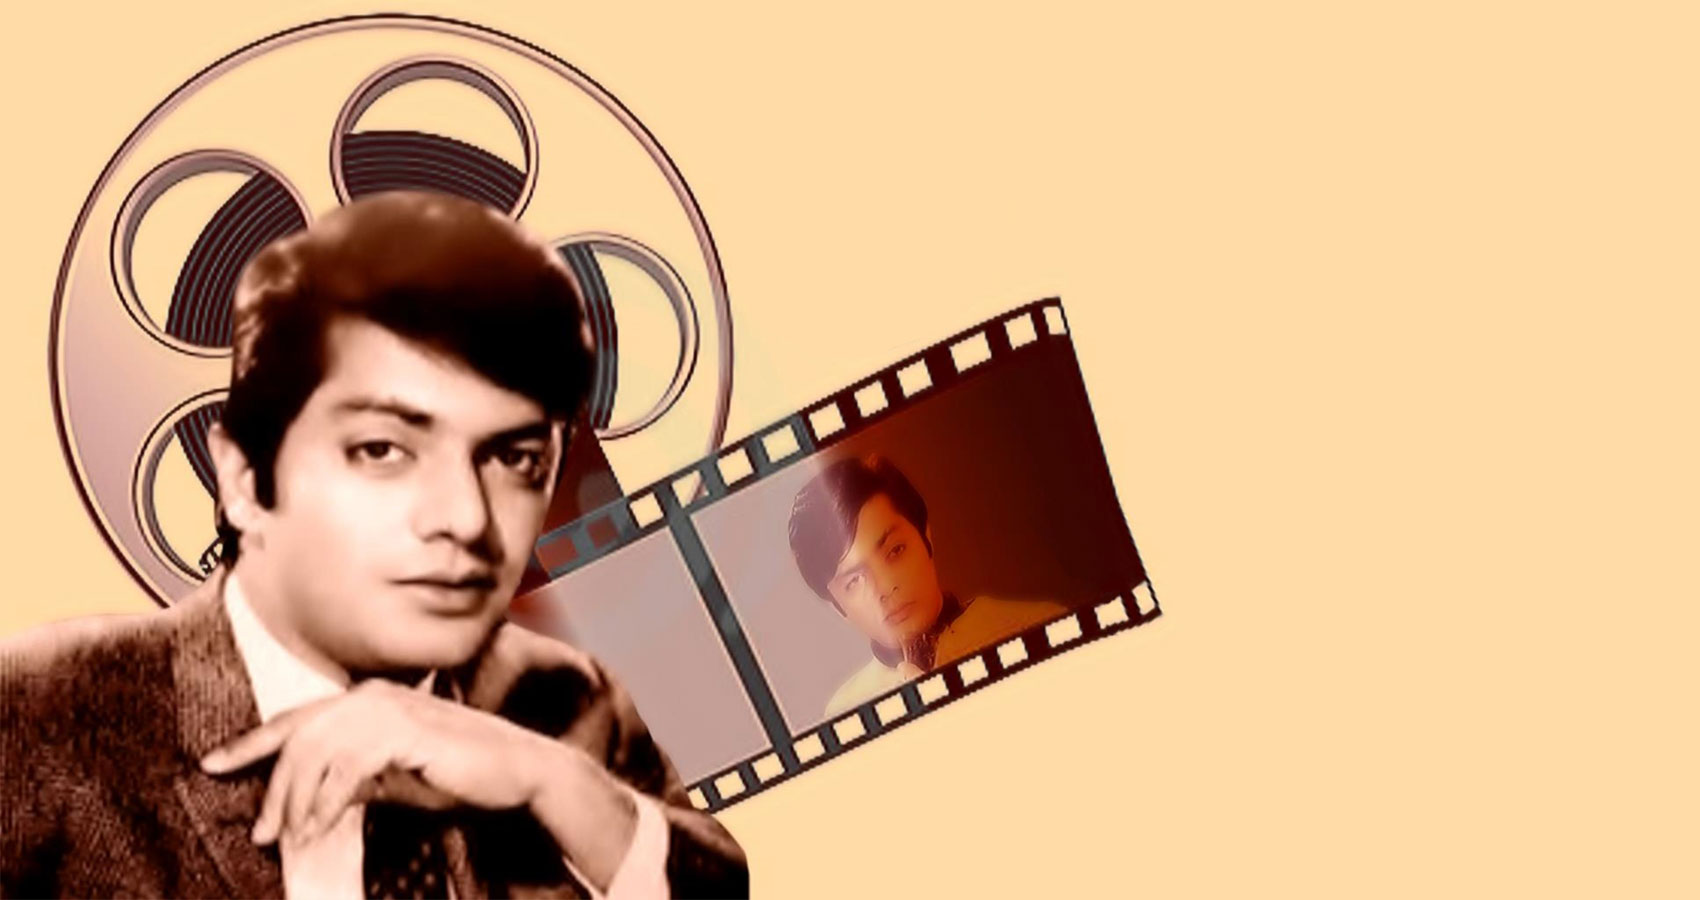 Emotion Recollected in Tranquillity - A Prose on Waheed Murad, by Mehreen Ahmed at Spillwords.com